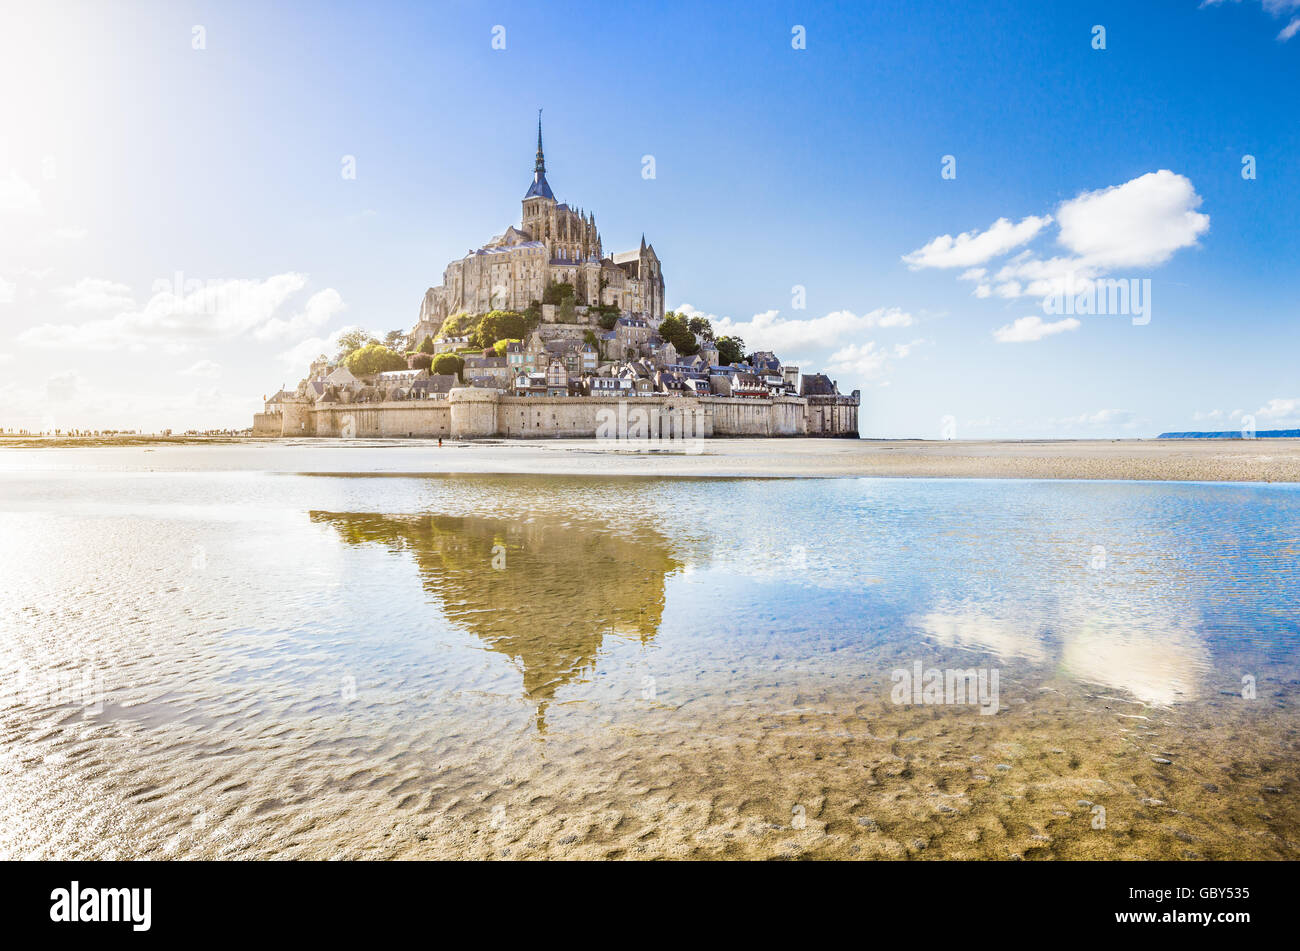 Classic view of famous Le Mont Saint-Michel tidal island on a sunny day with blue sky and clouds, Normandy, northern France Stock Photo